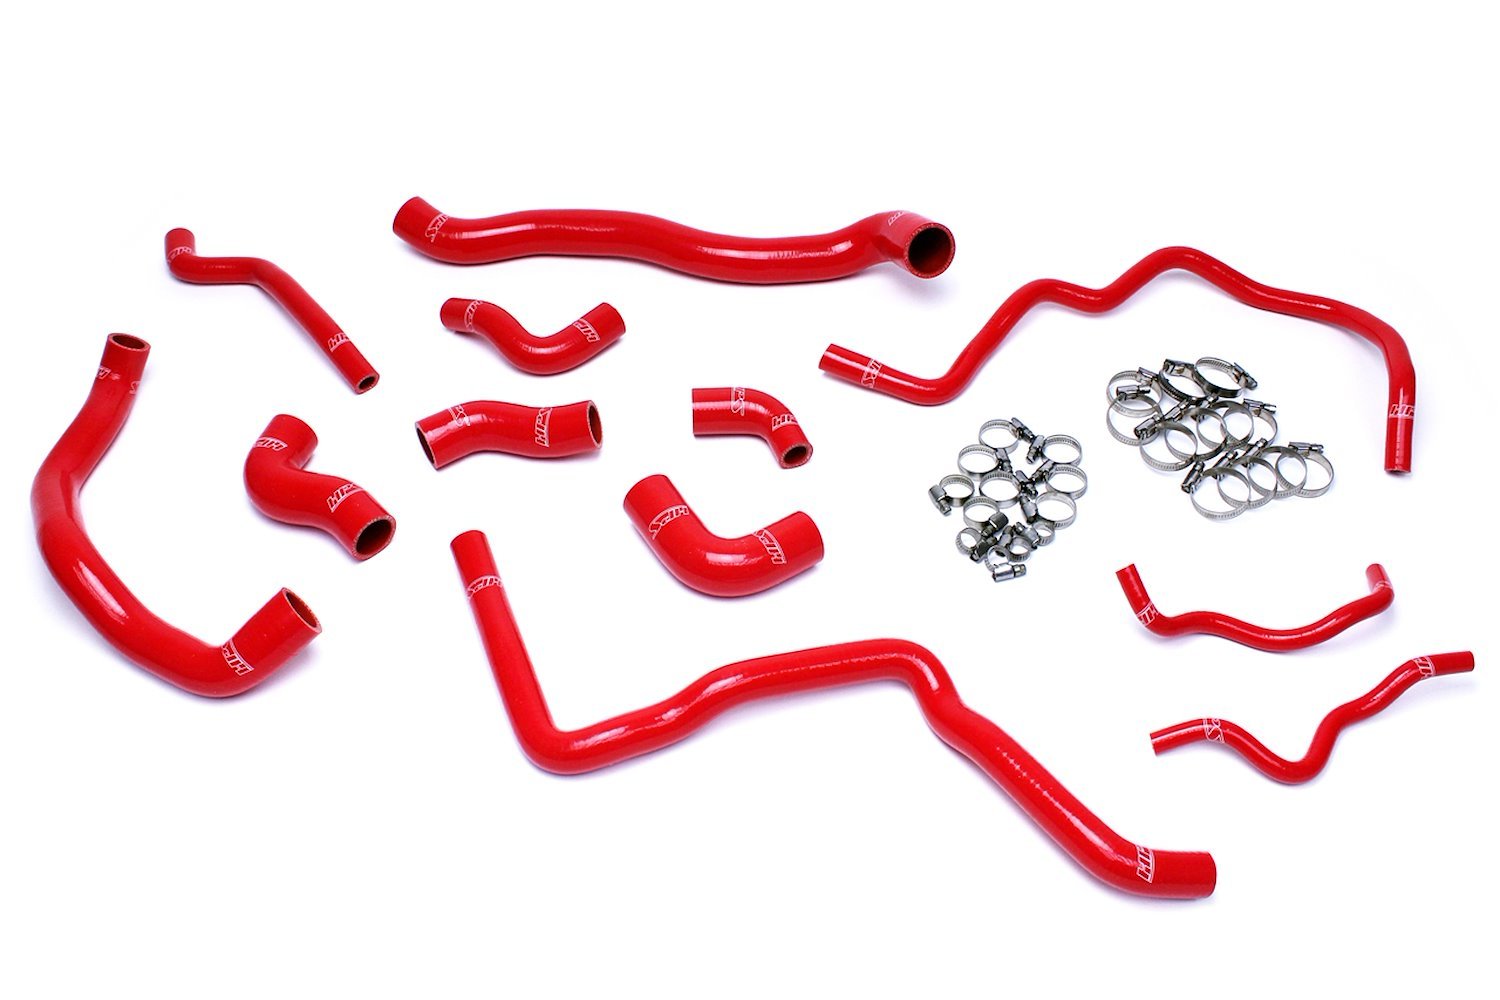 57-1476-RED Coolant Hose Kit, 3-Ply Reinforced Silicone, Replaces Rubber Radiator & Ancillary Coolant Hoses